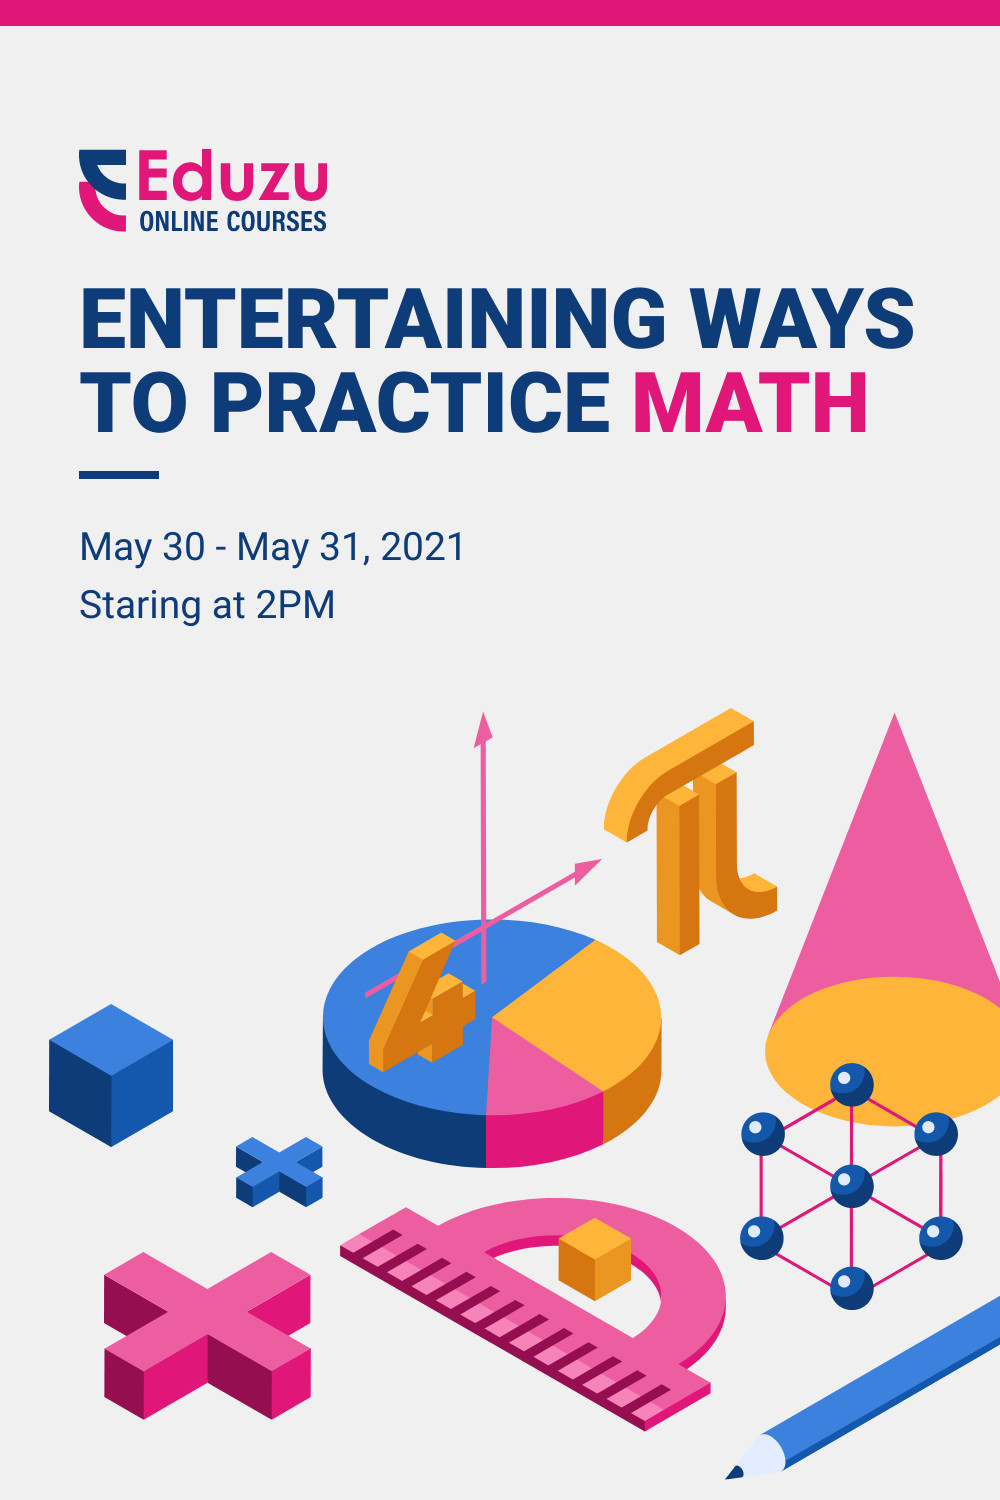 Entertaining Ways to Practice Math Facebook Cover 820x360